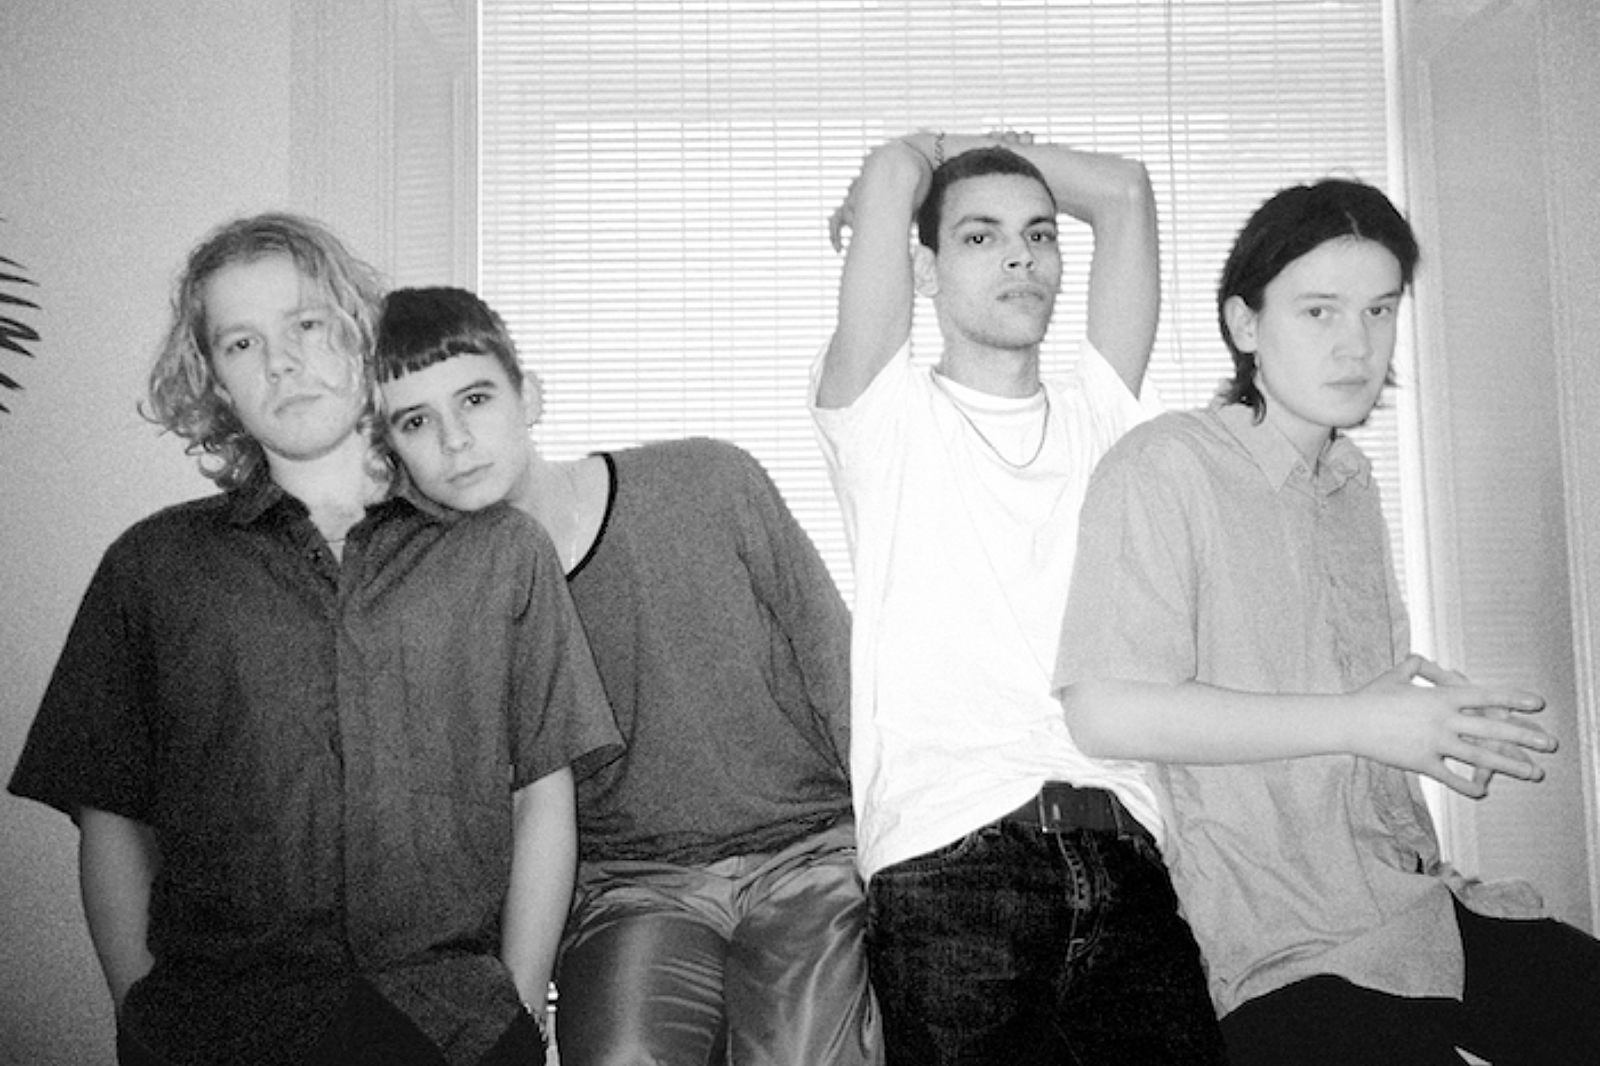 LISS share new track 'Leave Me On The Floor'